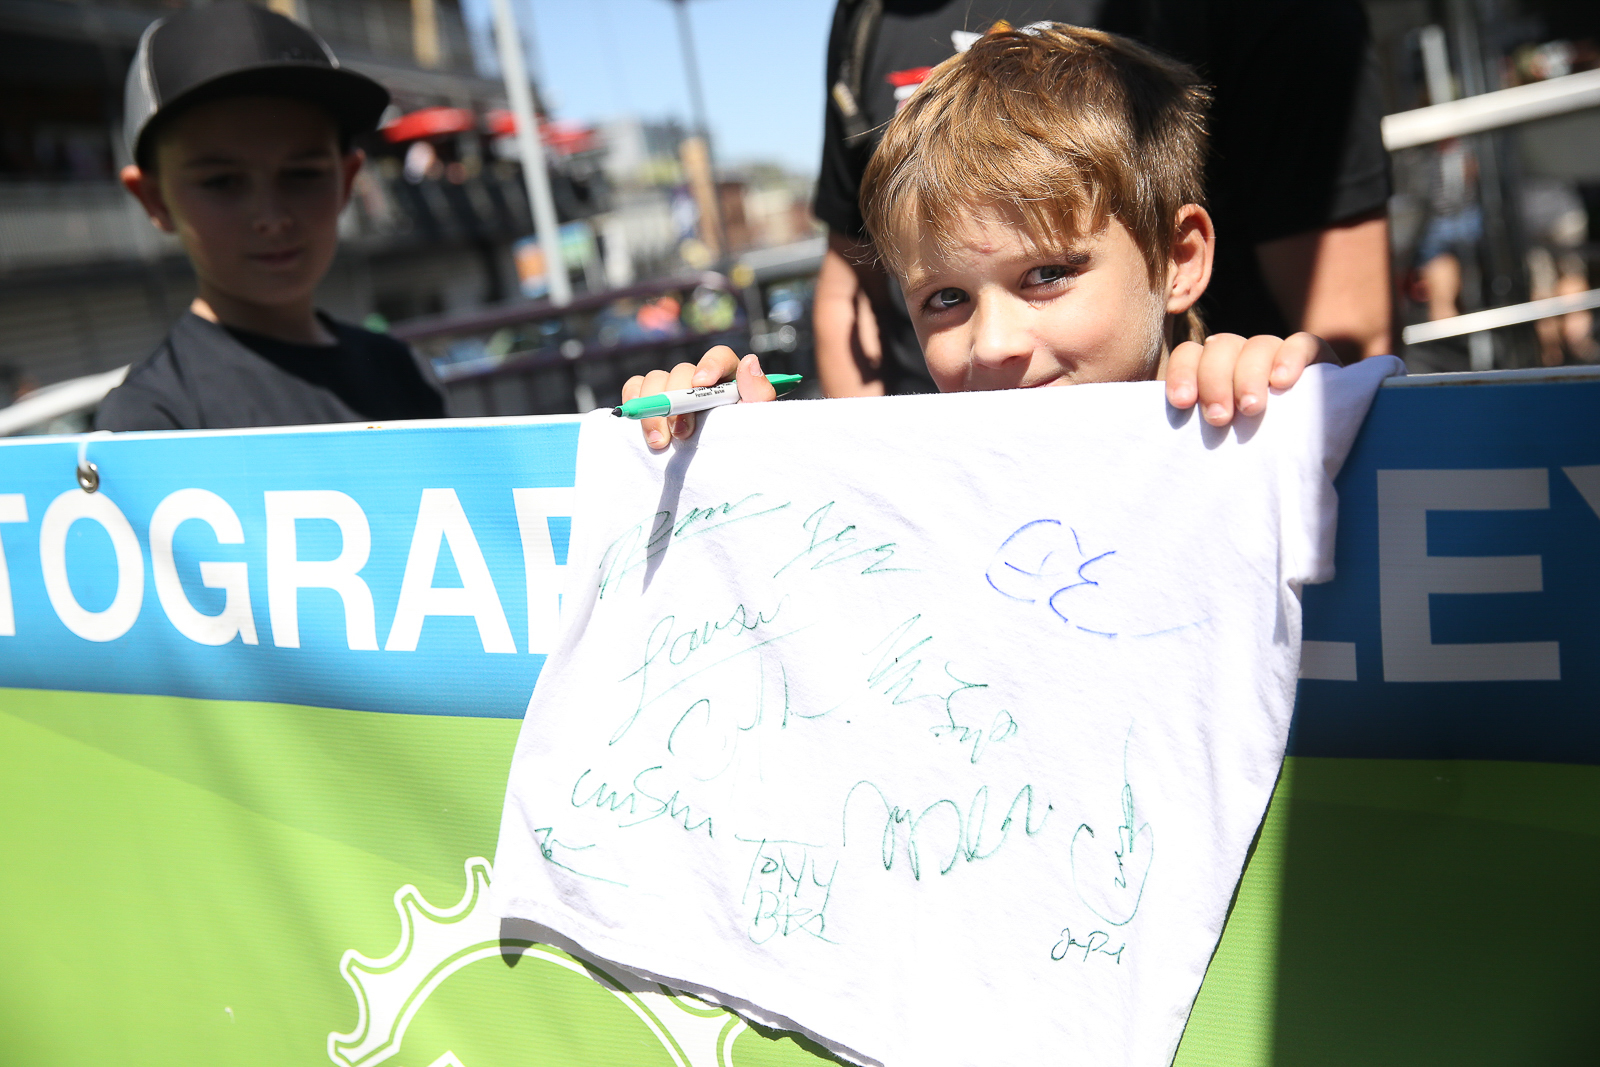 A happy young fan at Autograph Alley.